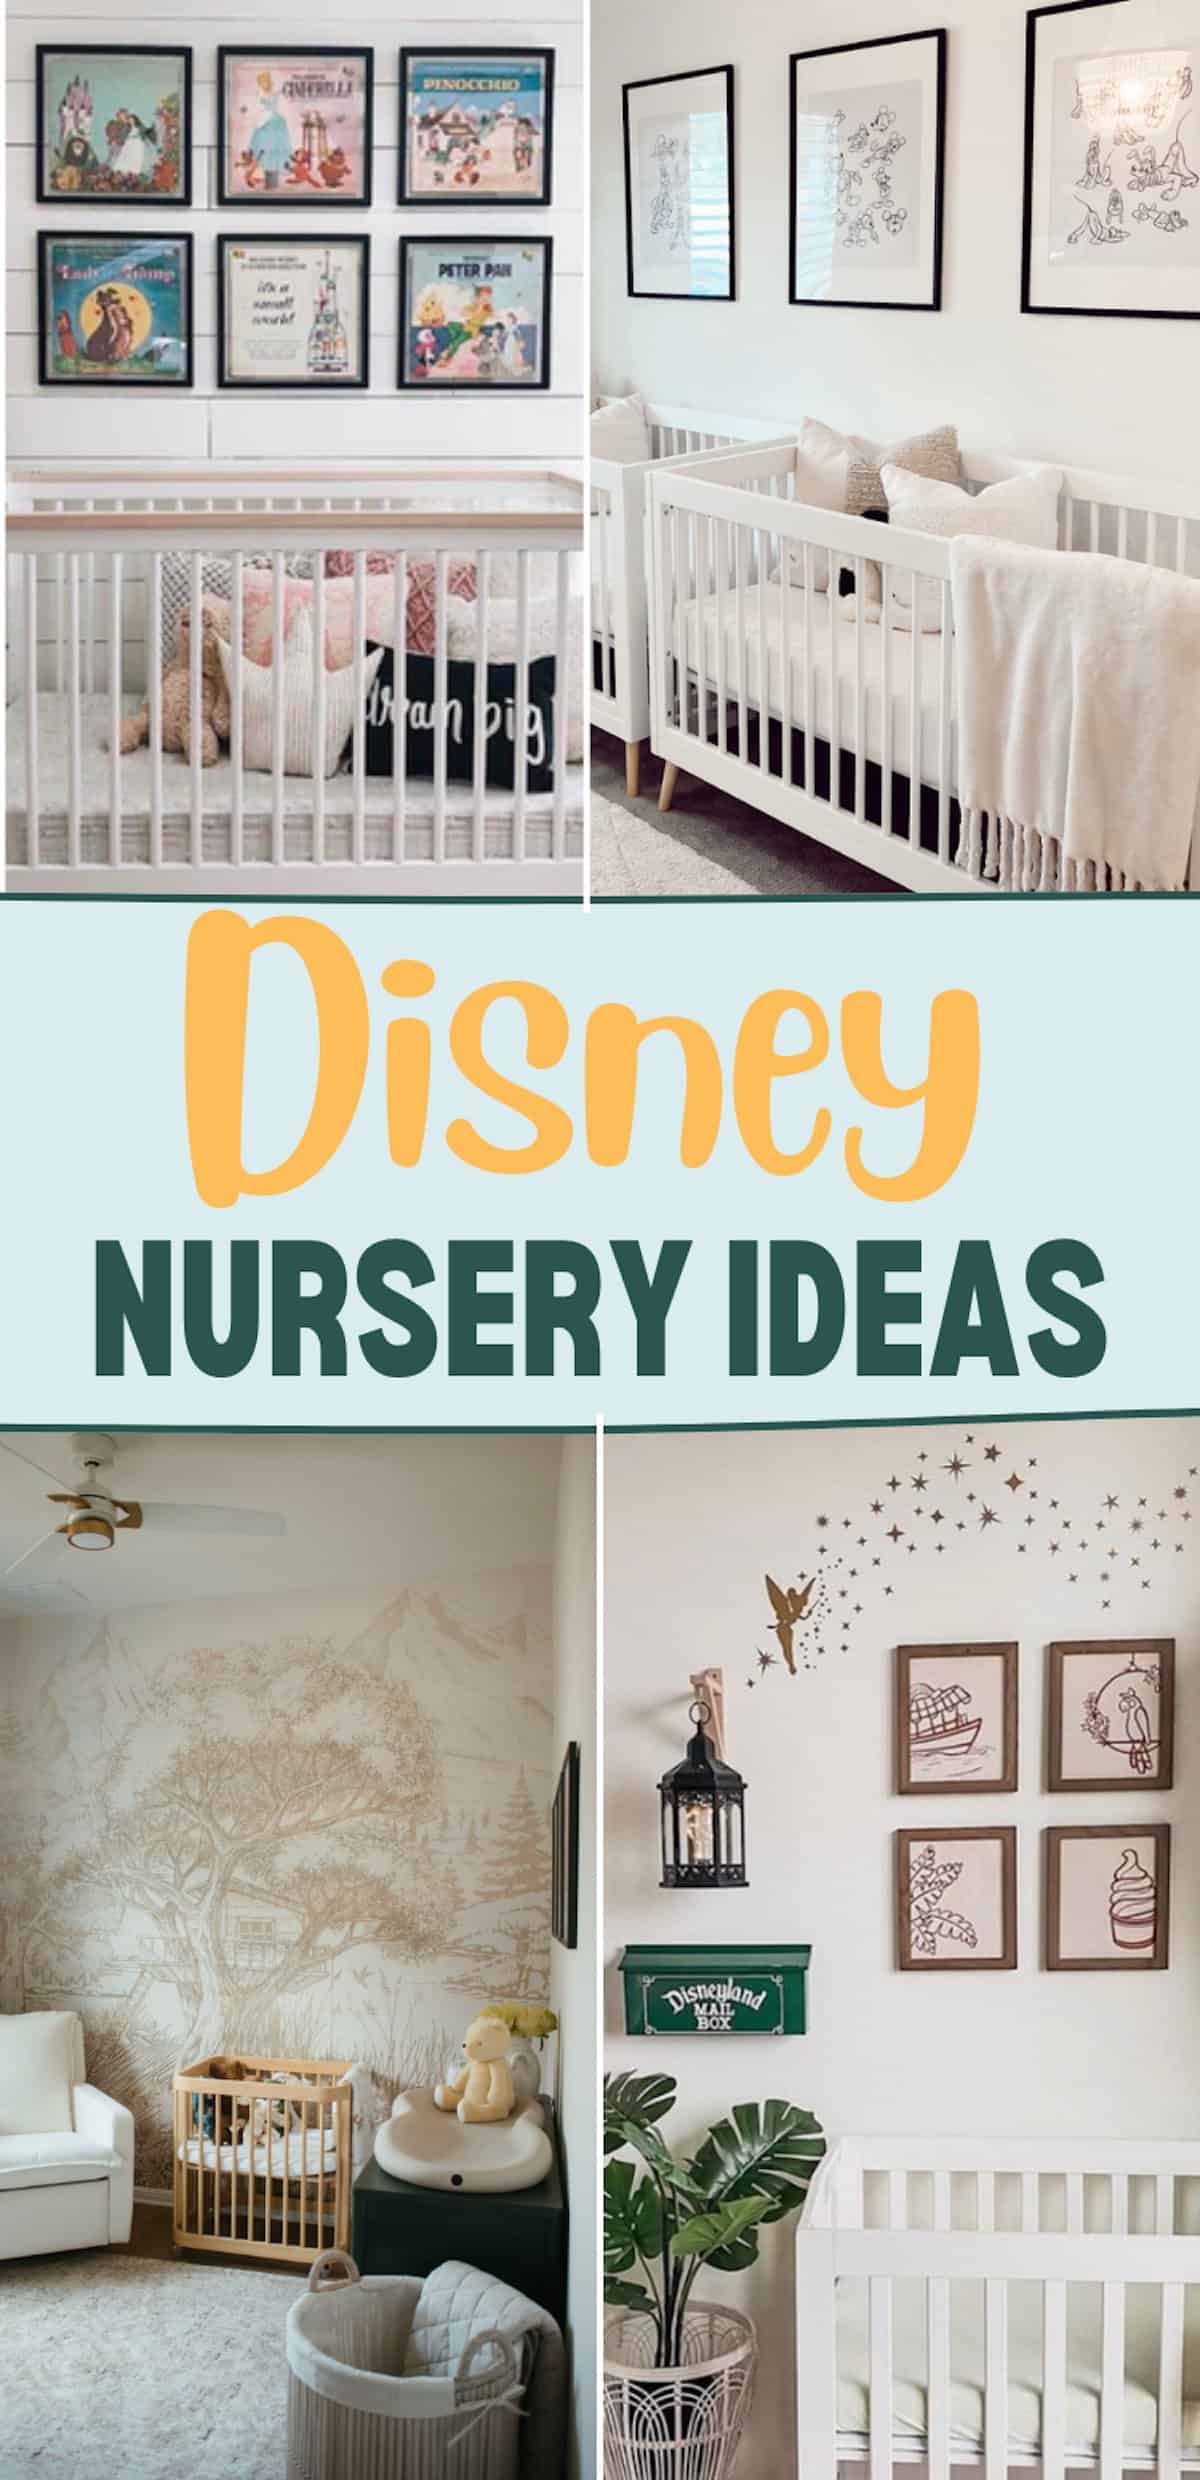 Over 35 Disney nursery ideas that are perfect for your newest magic maker. Find boy, girl, and gender neutral Disney themed nurseries for magical inspiration!